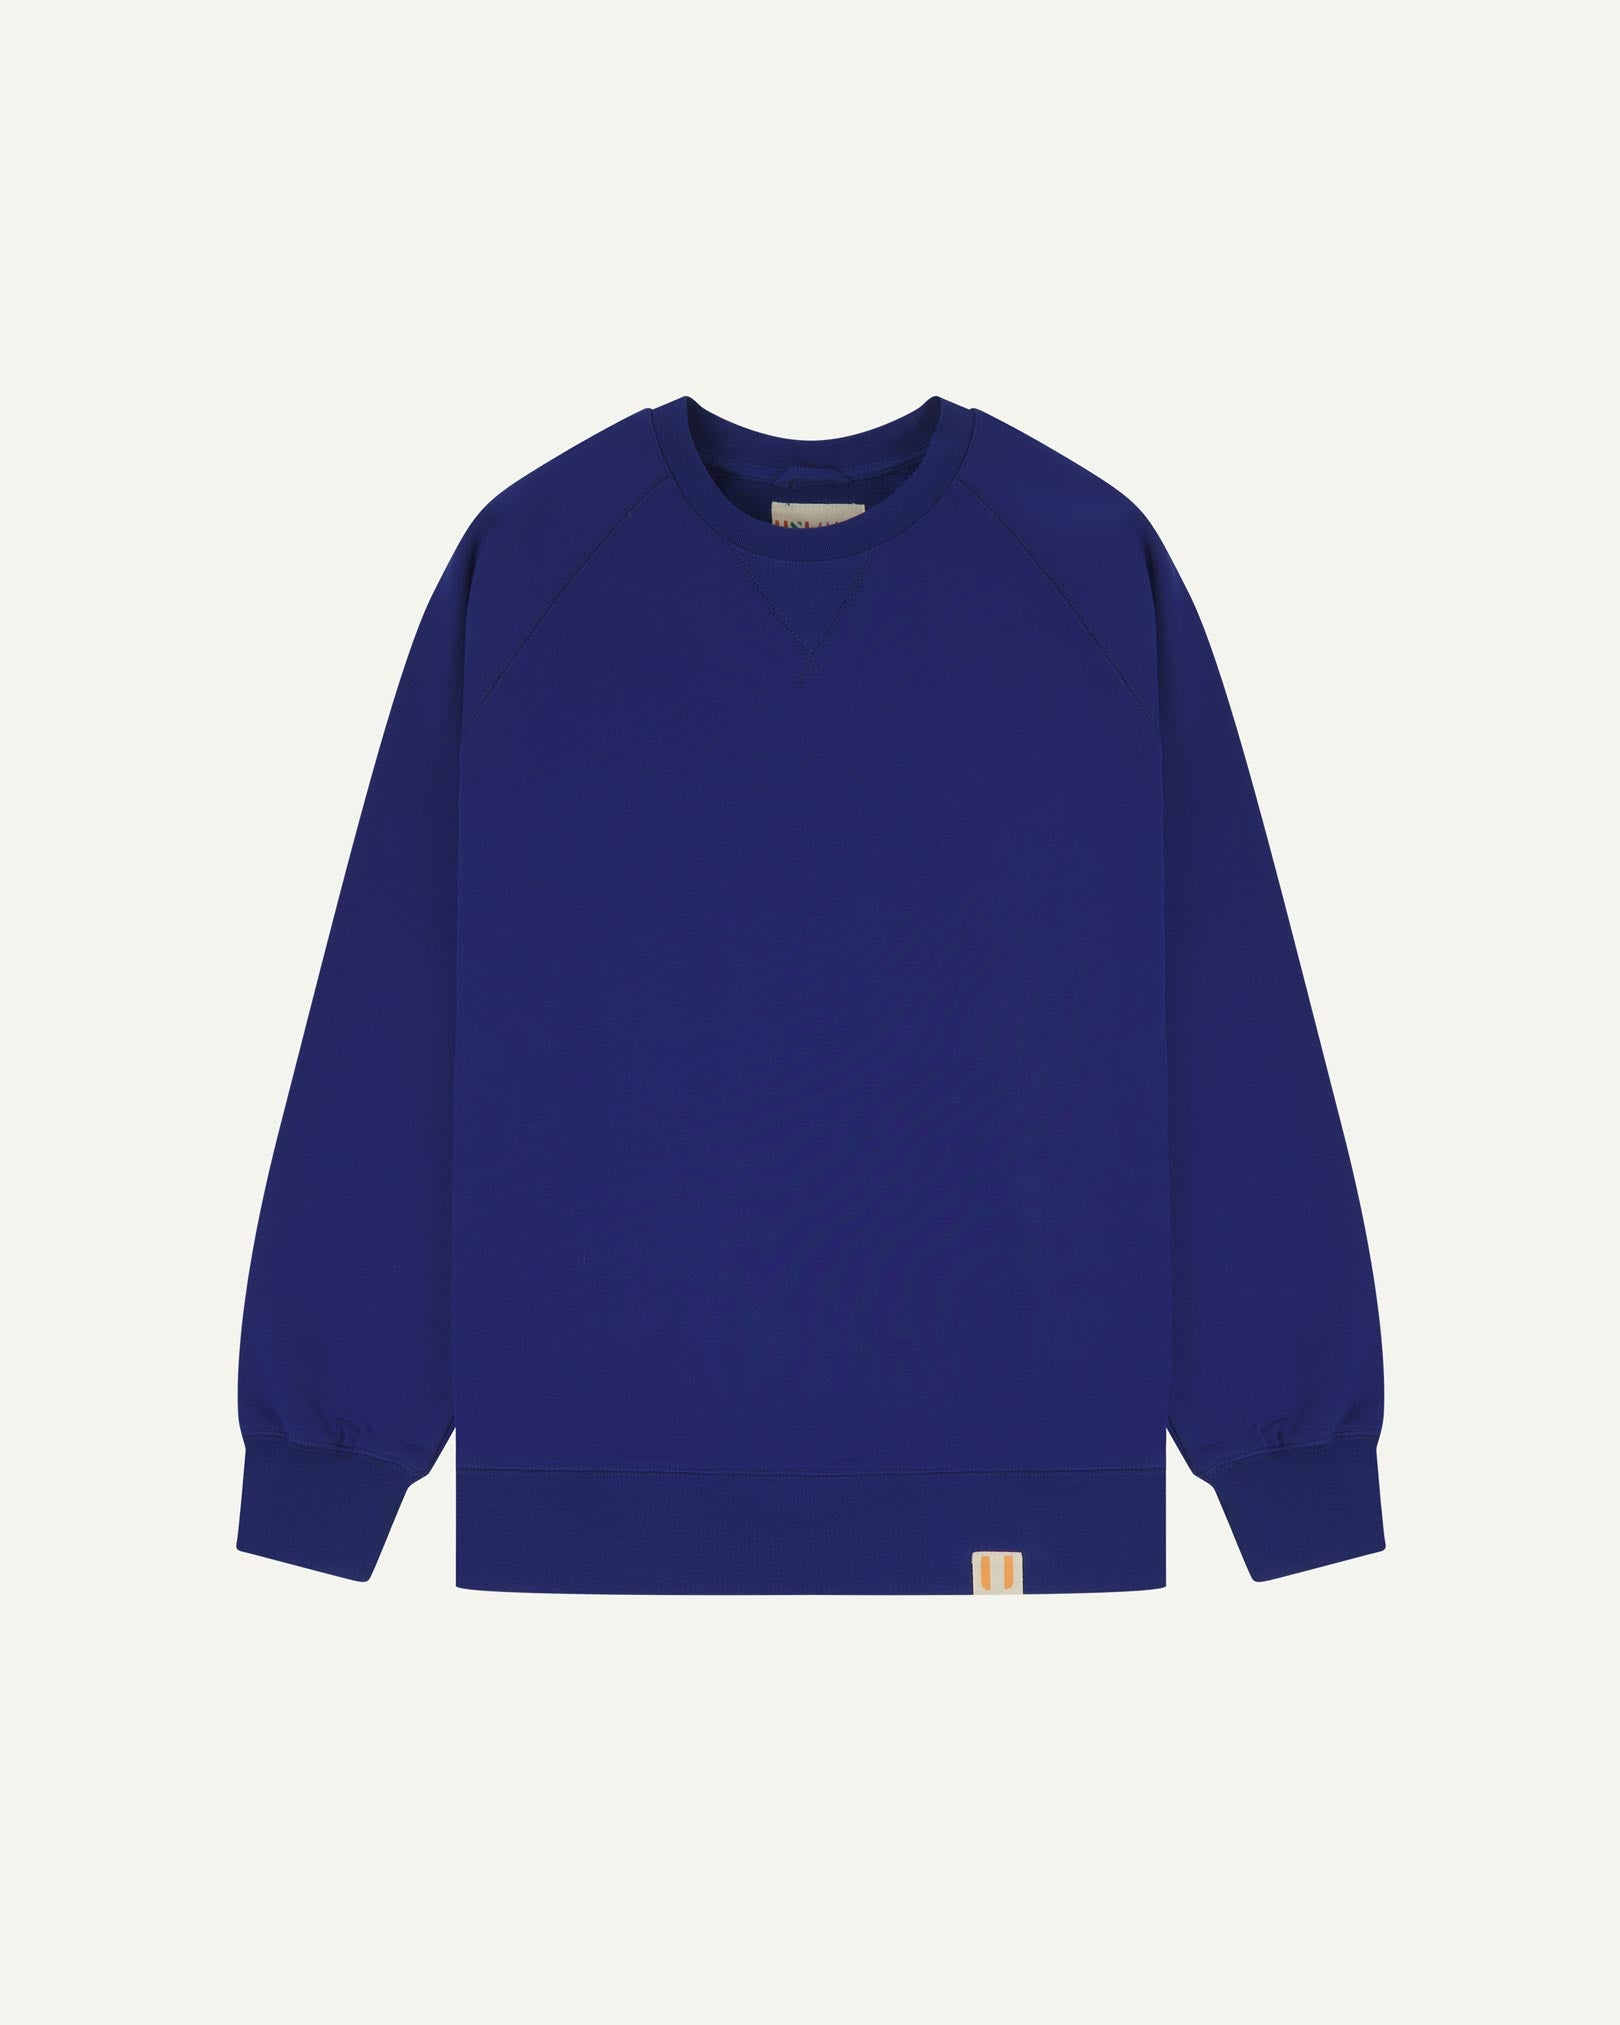 Front view of ultra-blue organic heavyweight cotton 7005 sweatshirt by Uskees demonstrating regular, flattering shape.